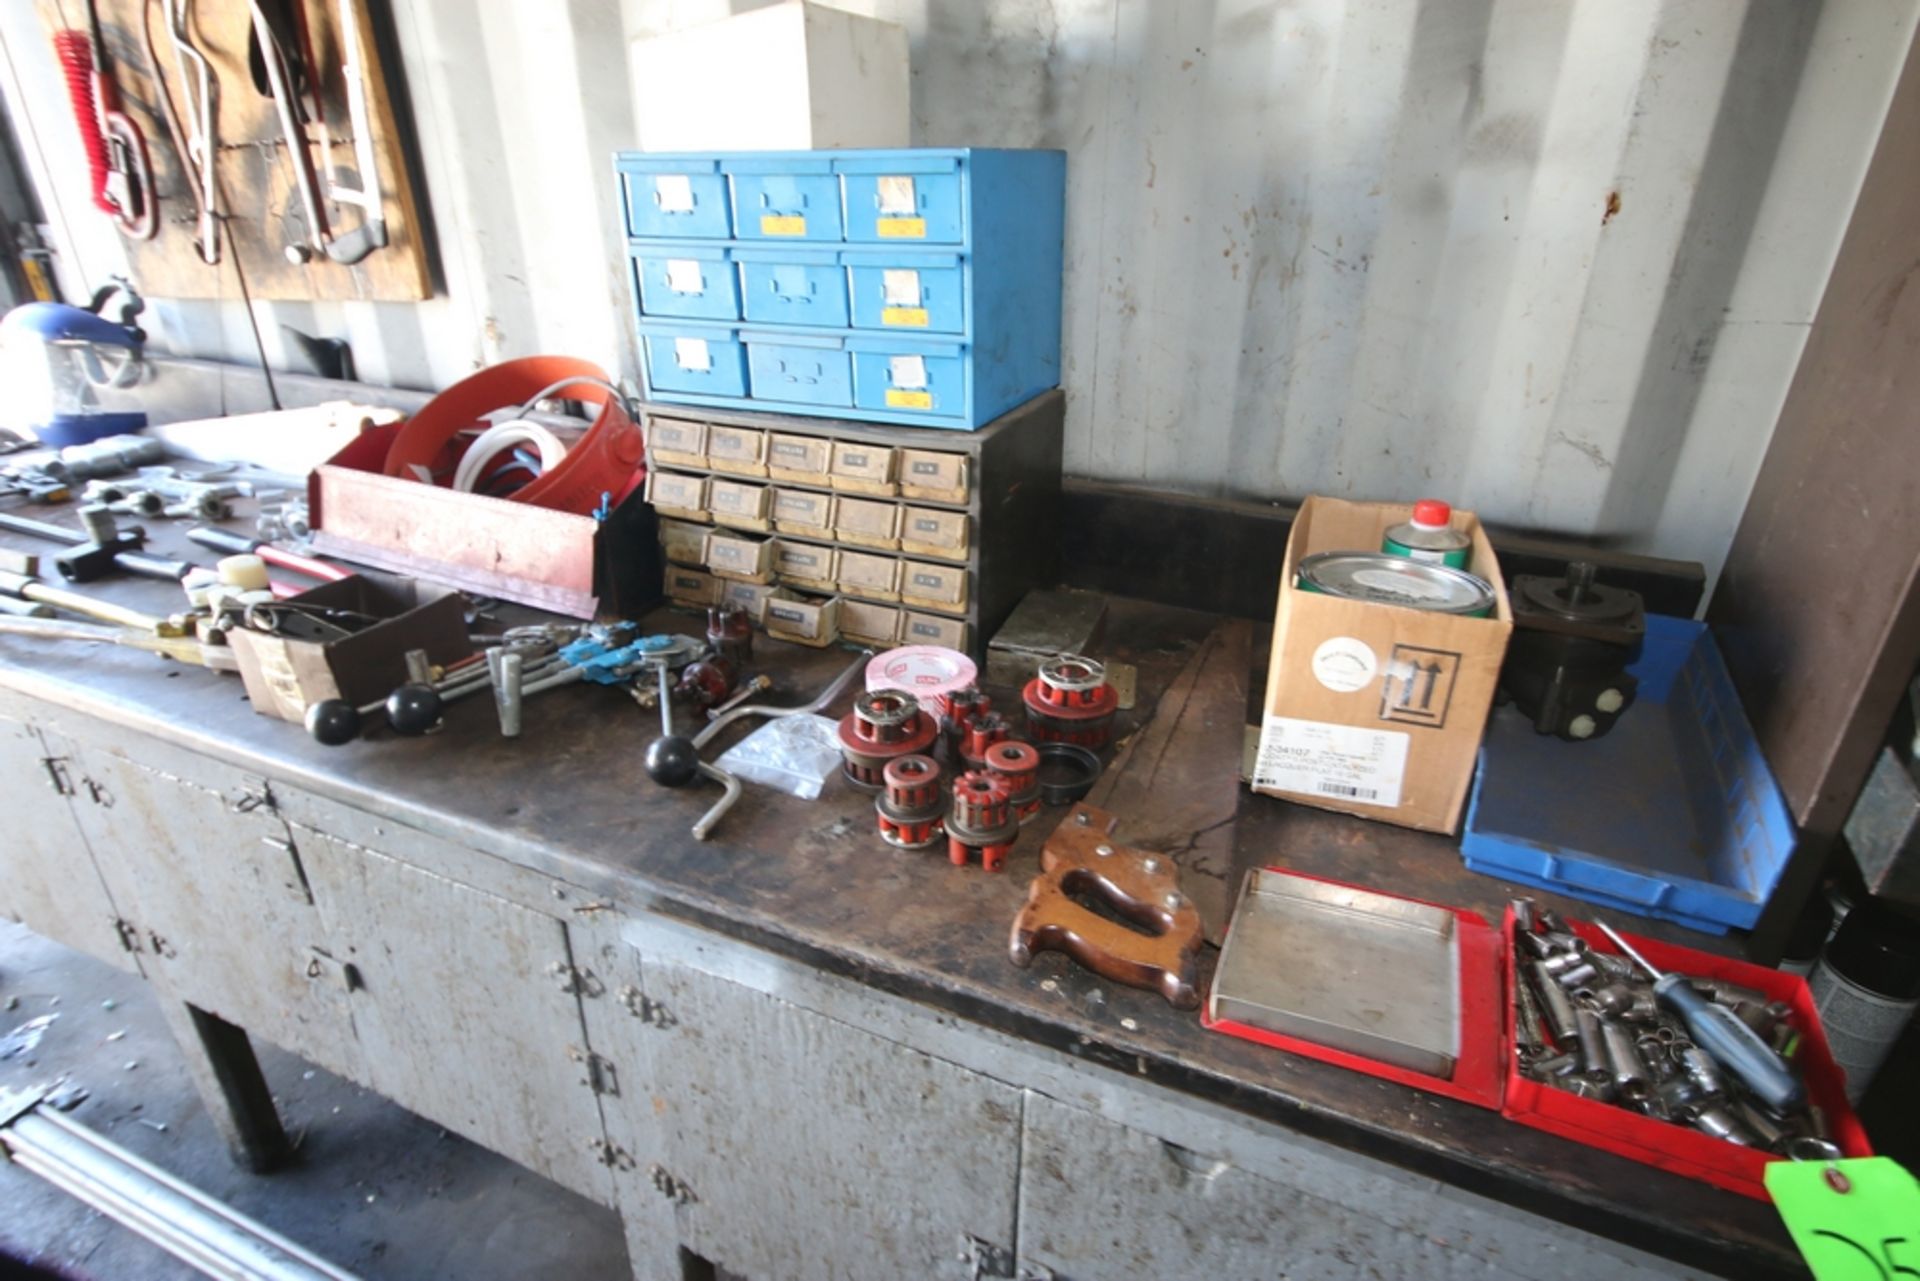 Shop Table with Contents, Includes (8) "C"-Clamps, Wrenches, Pipe Threaders, Lock Cutter, Manual - Image 3 of 4